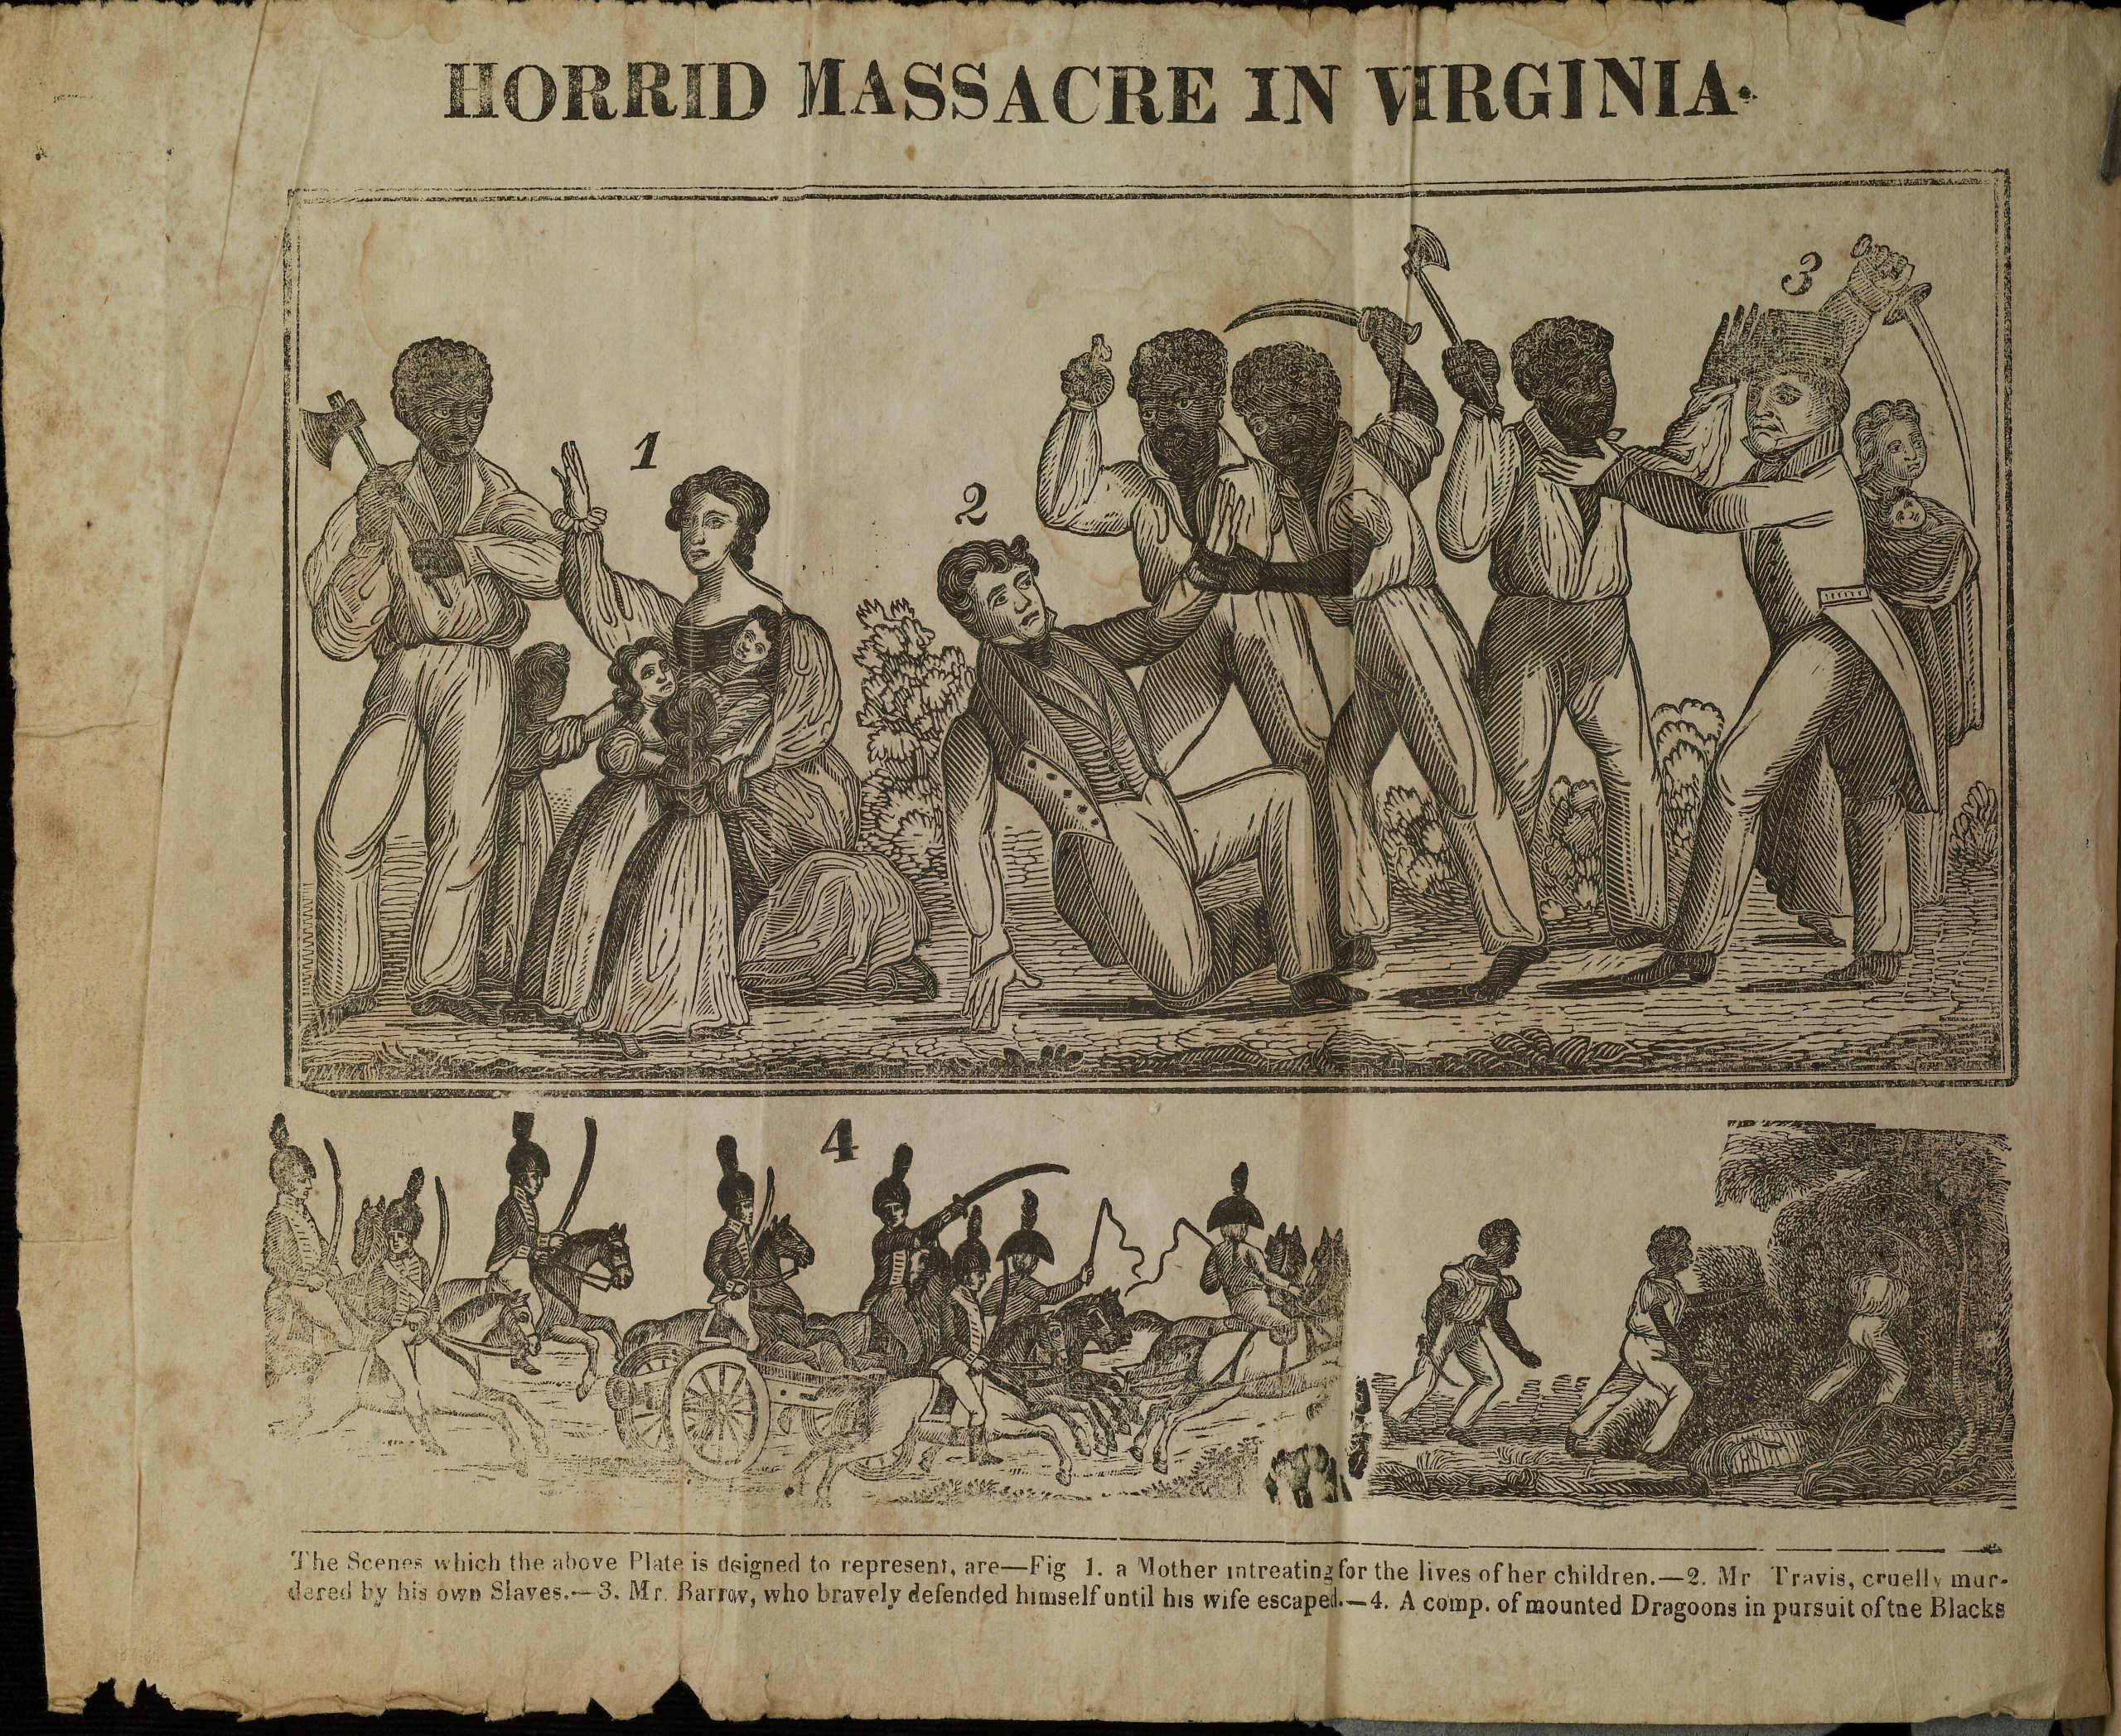 Woodcut depicting Nat Turner’s uprising, 1831 (University of Virginia Special Collections).